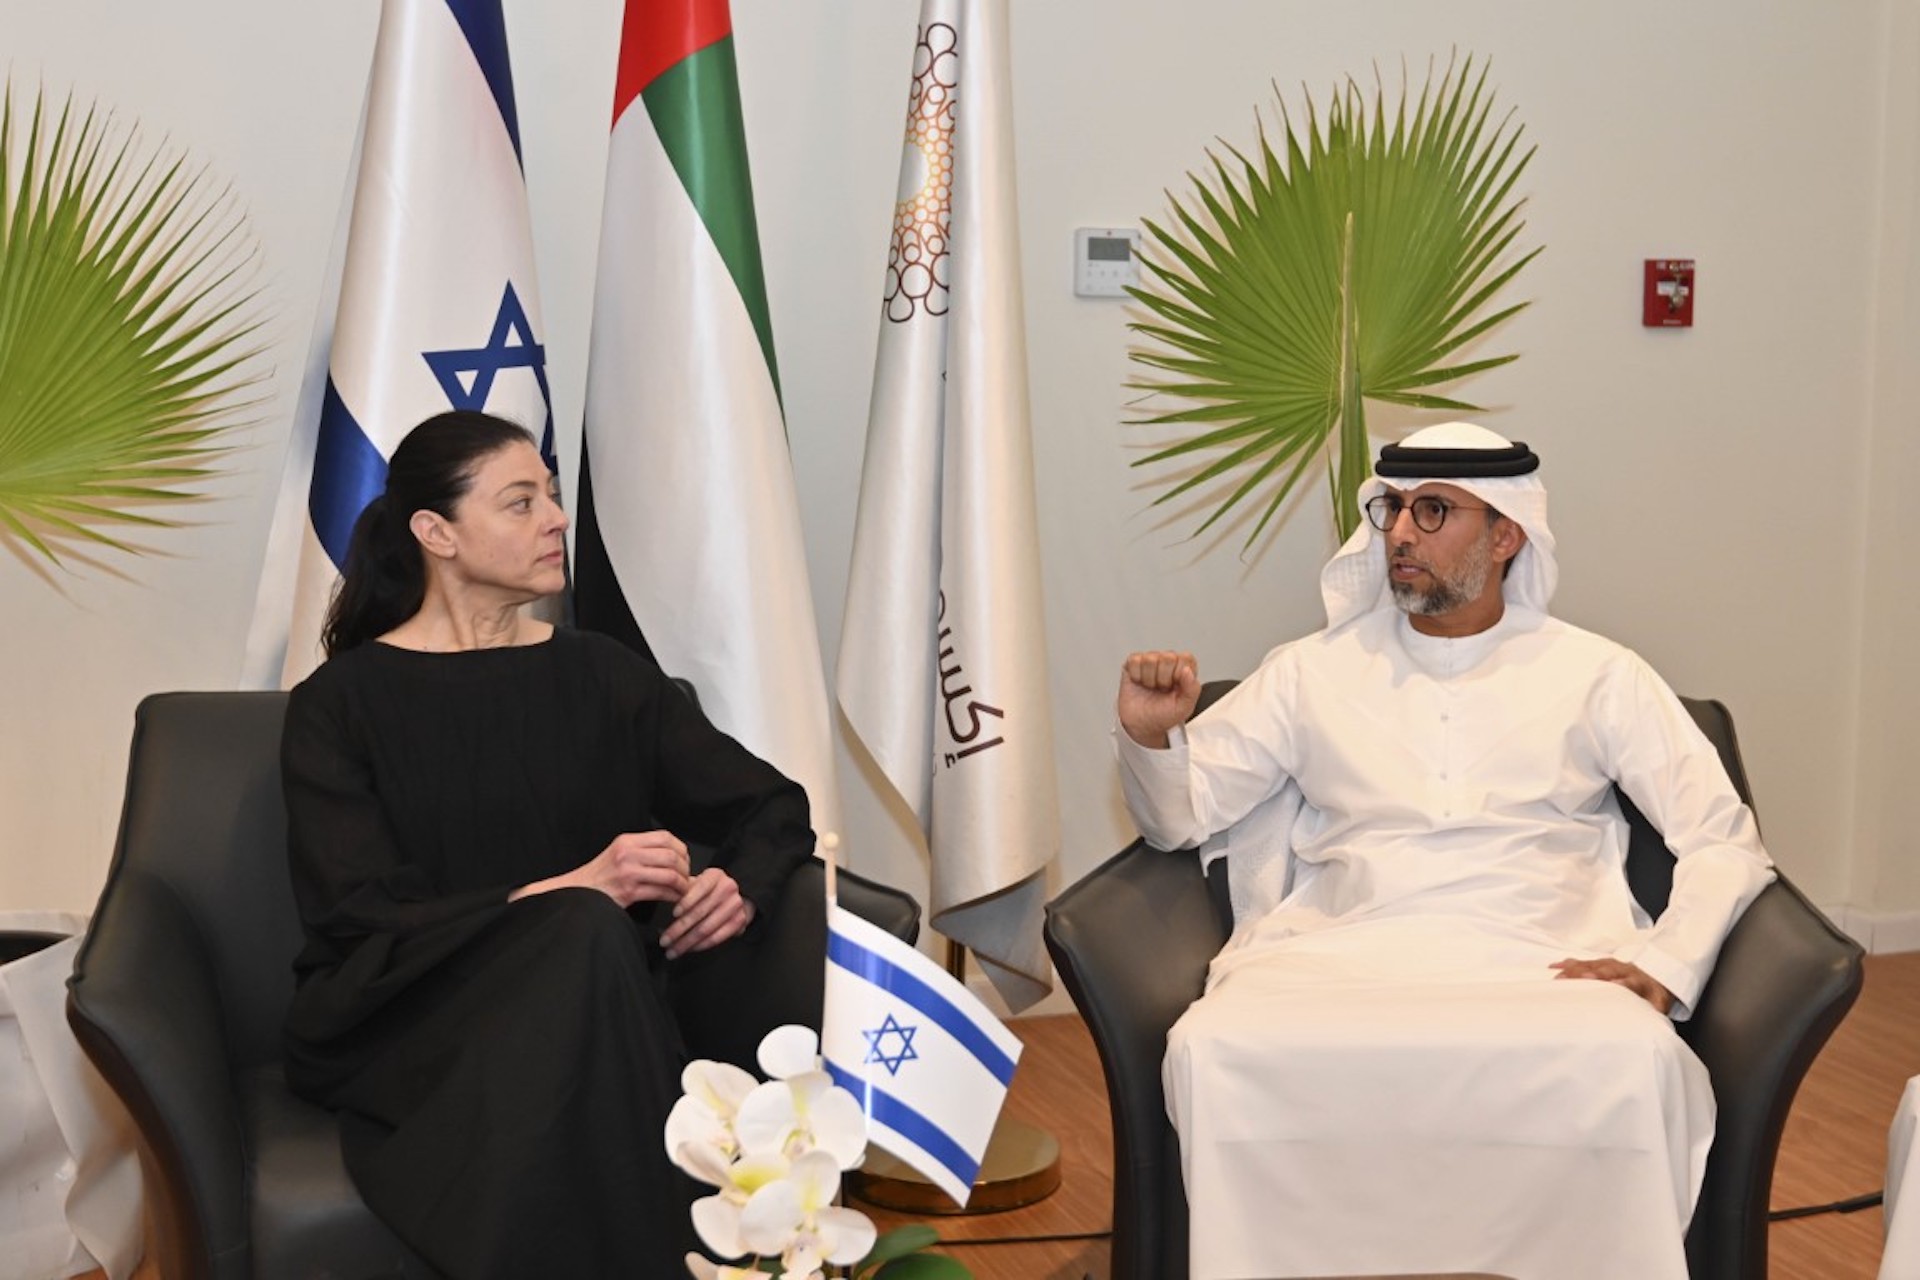 The UAE and Israel sign an MOU for maritime transportation cooperation